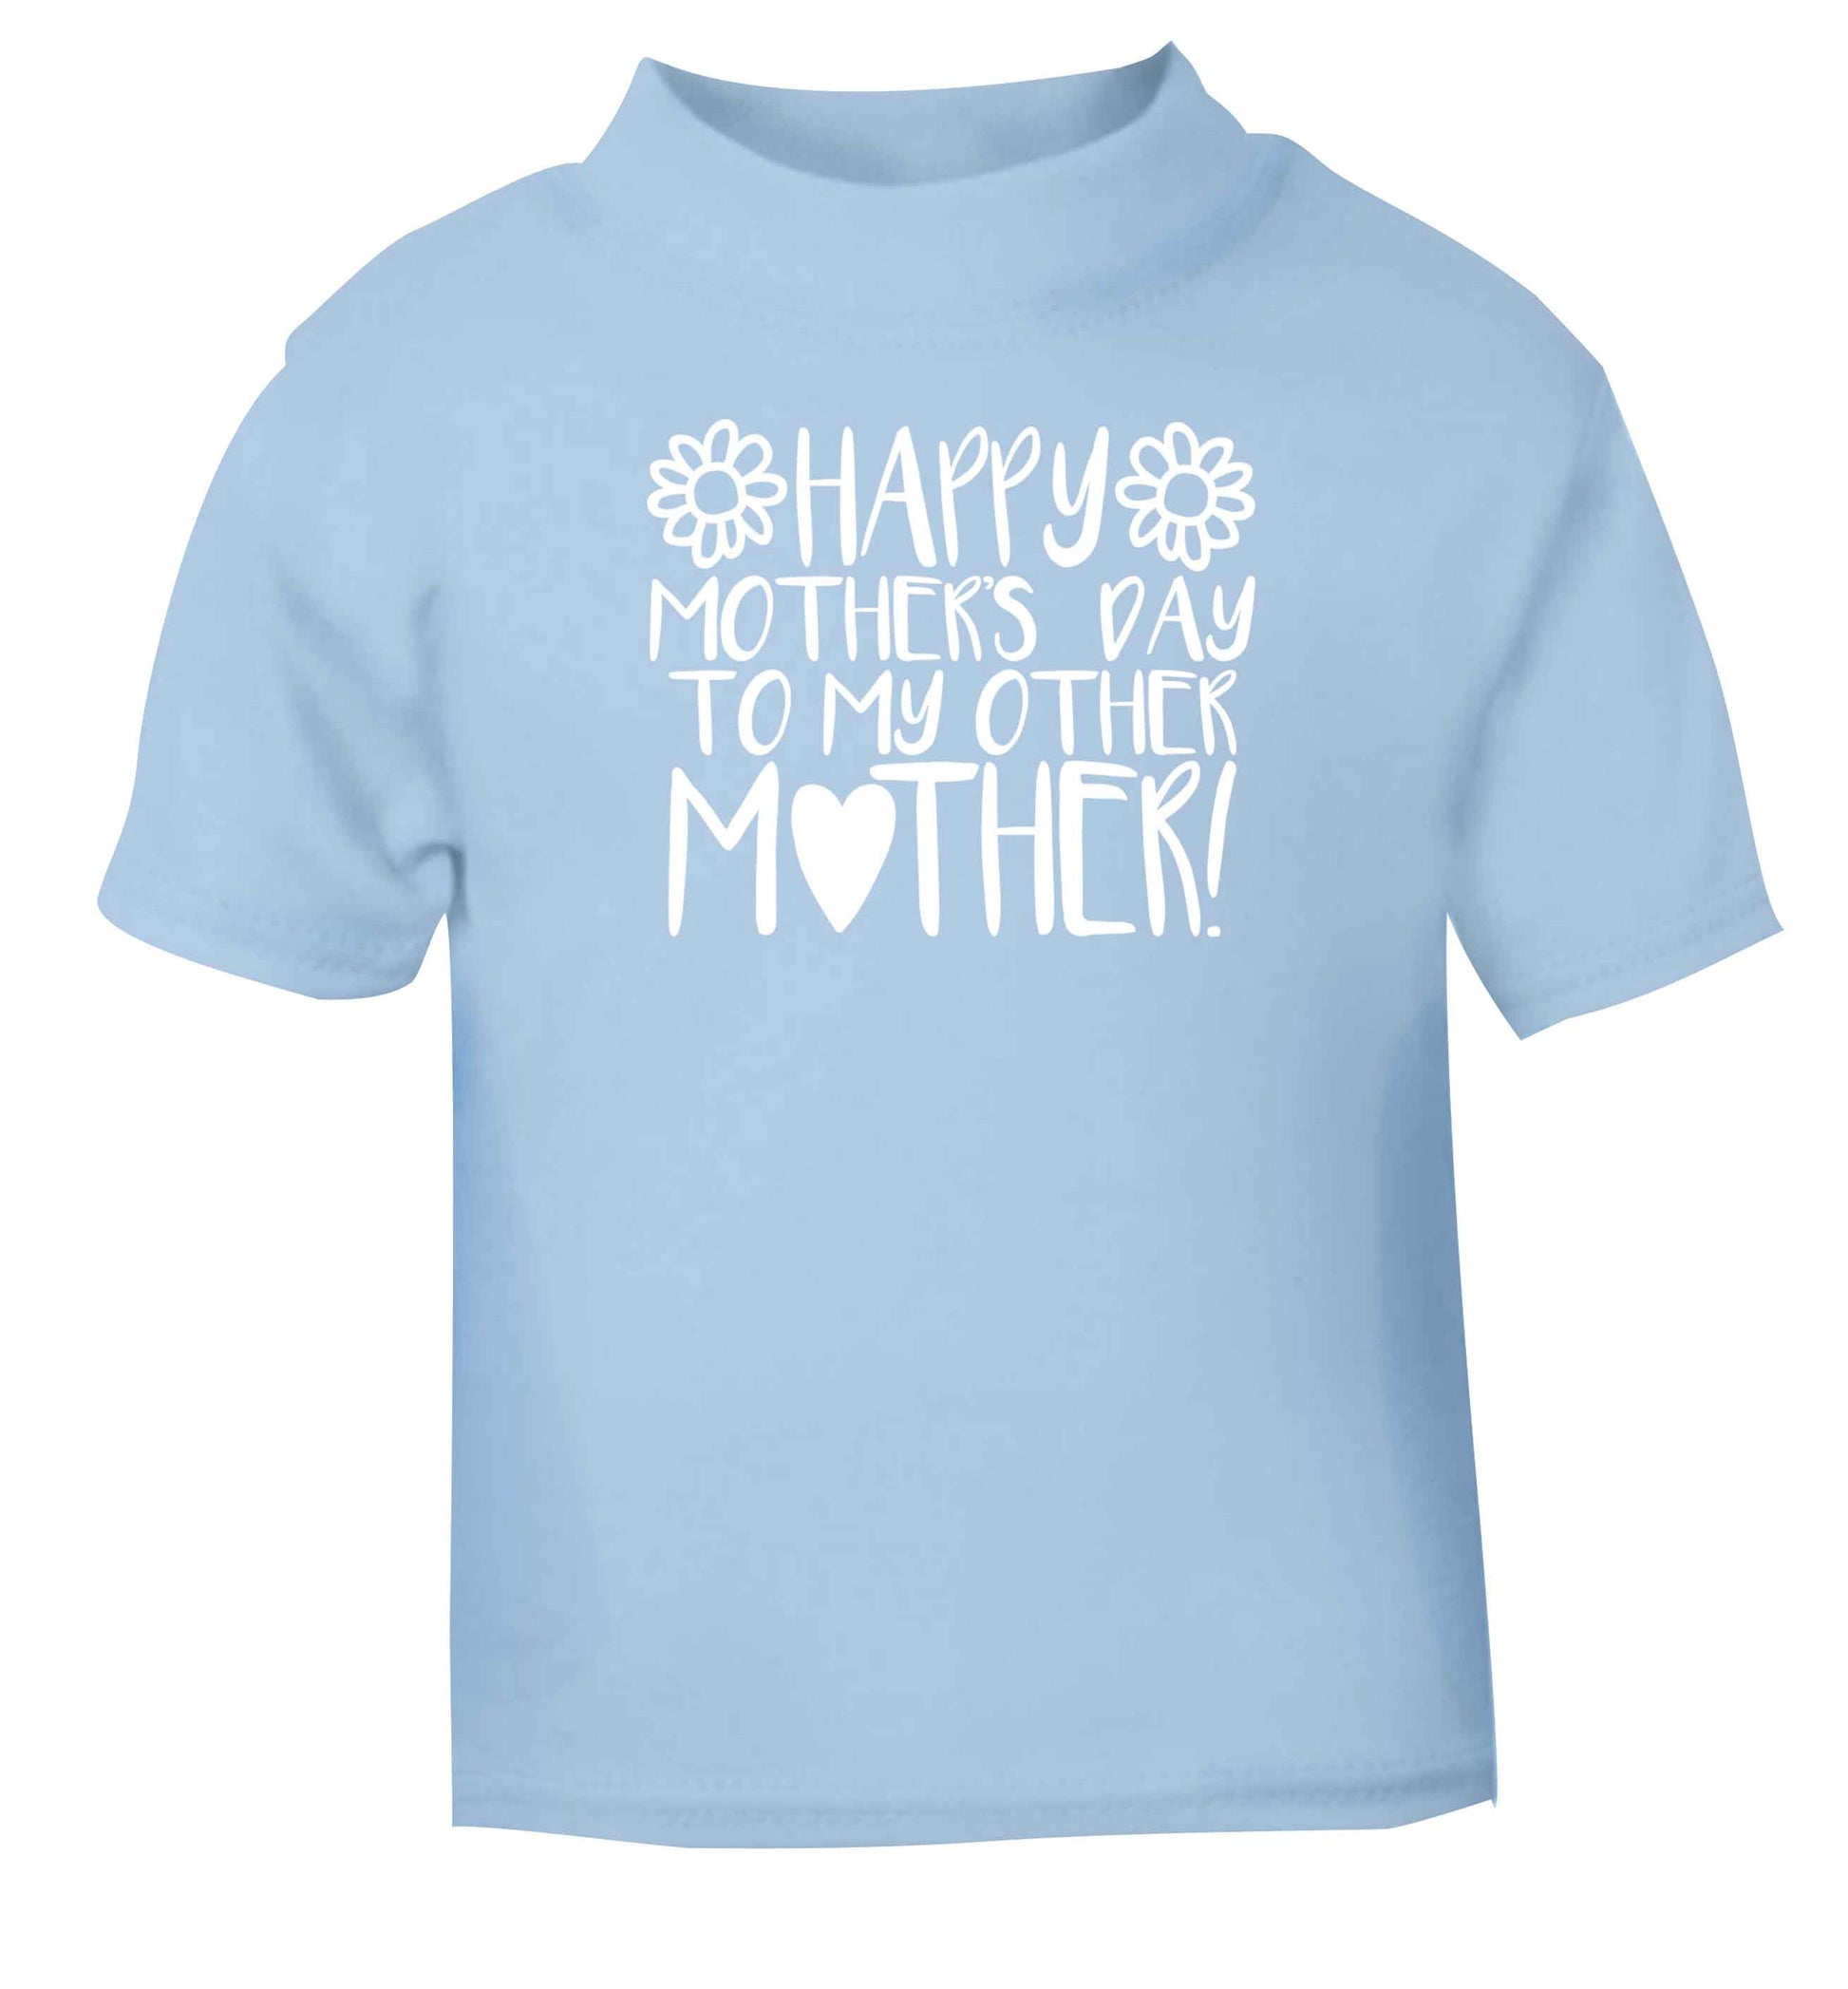 Happy mother's day to my other mother light blue baby toddler Tshirt 2 Years